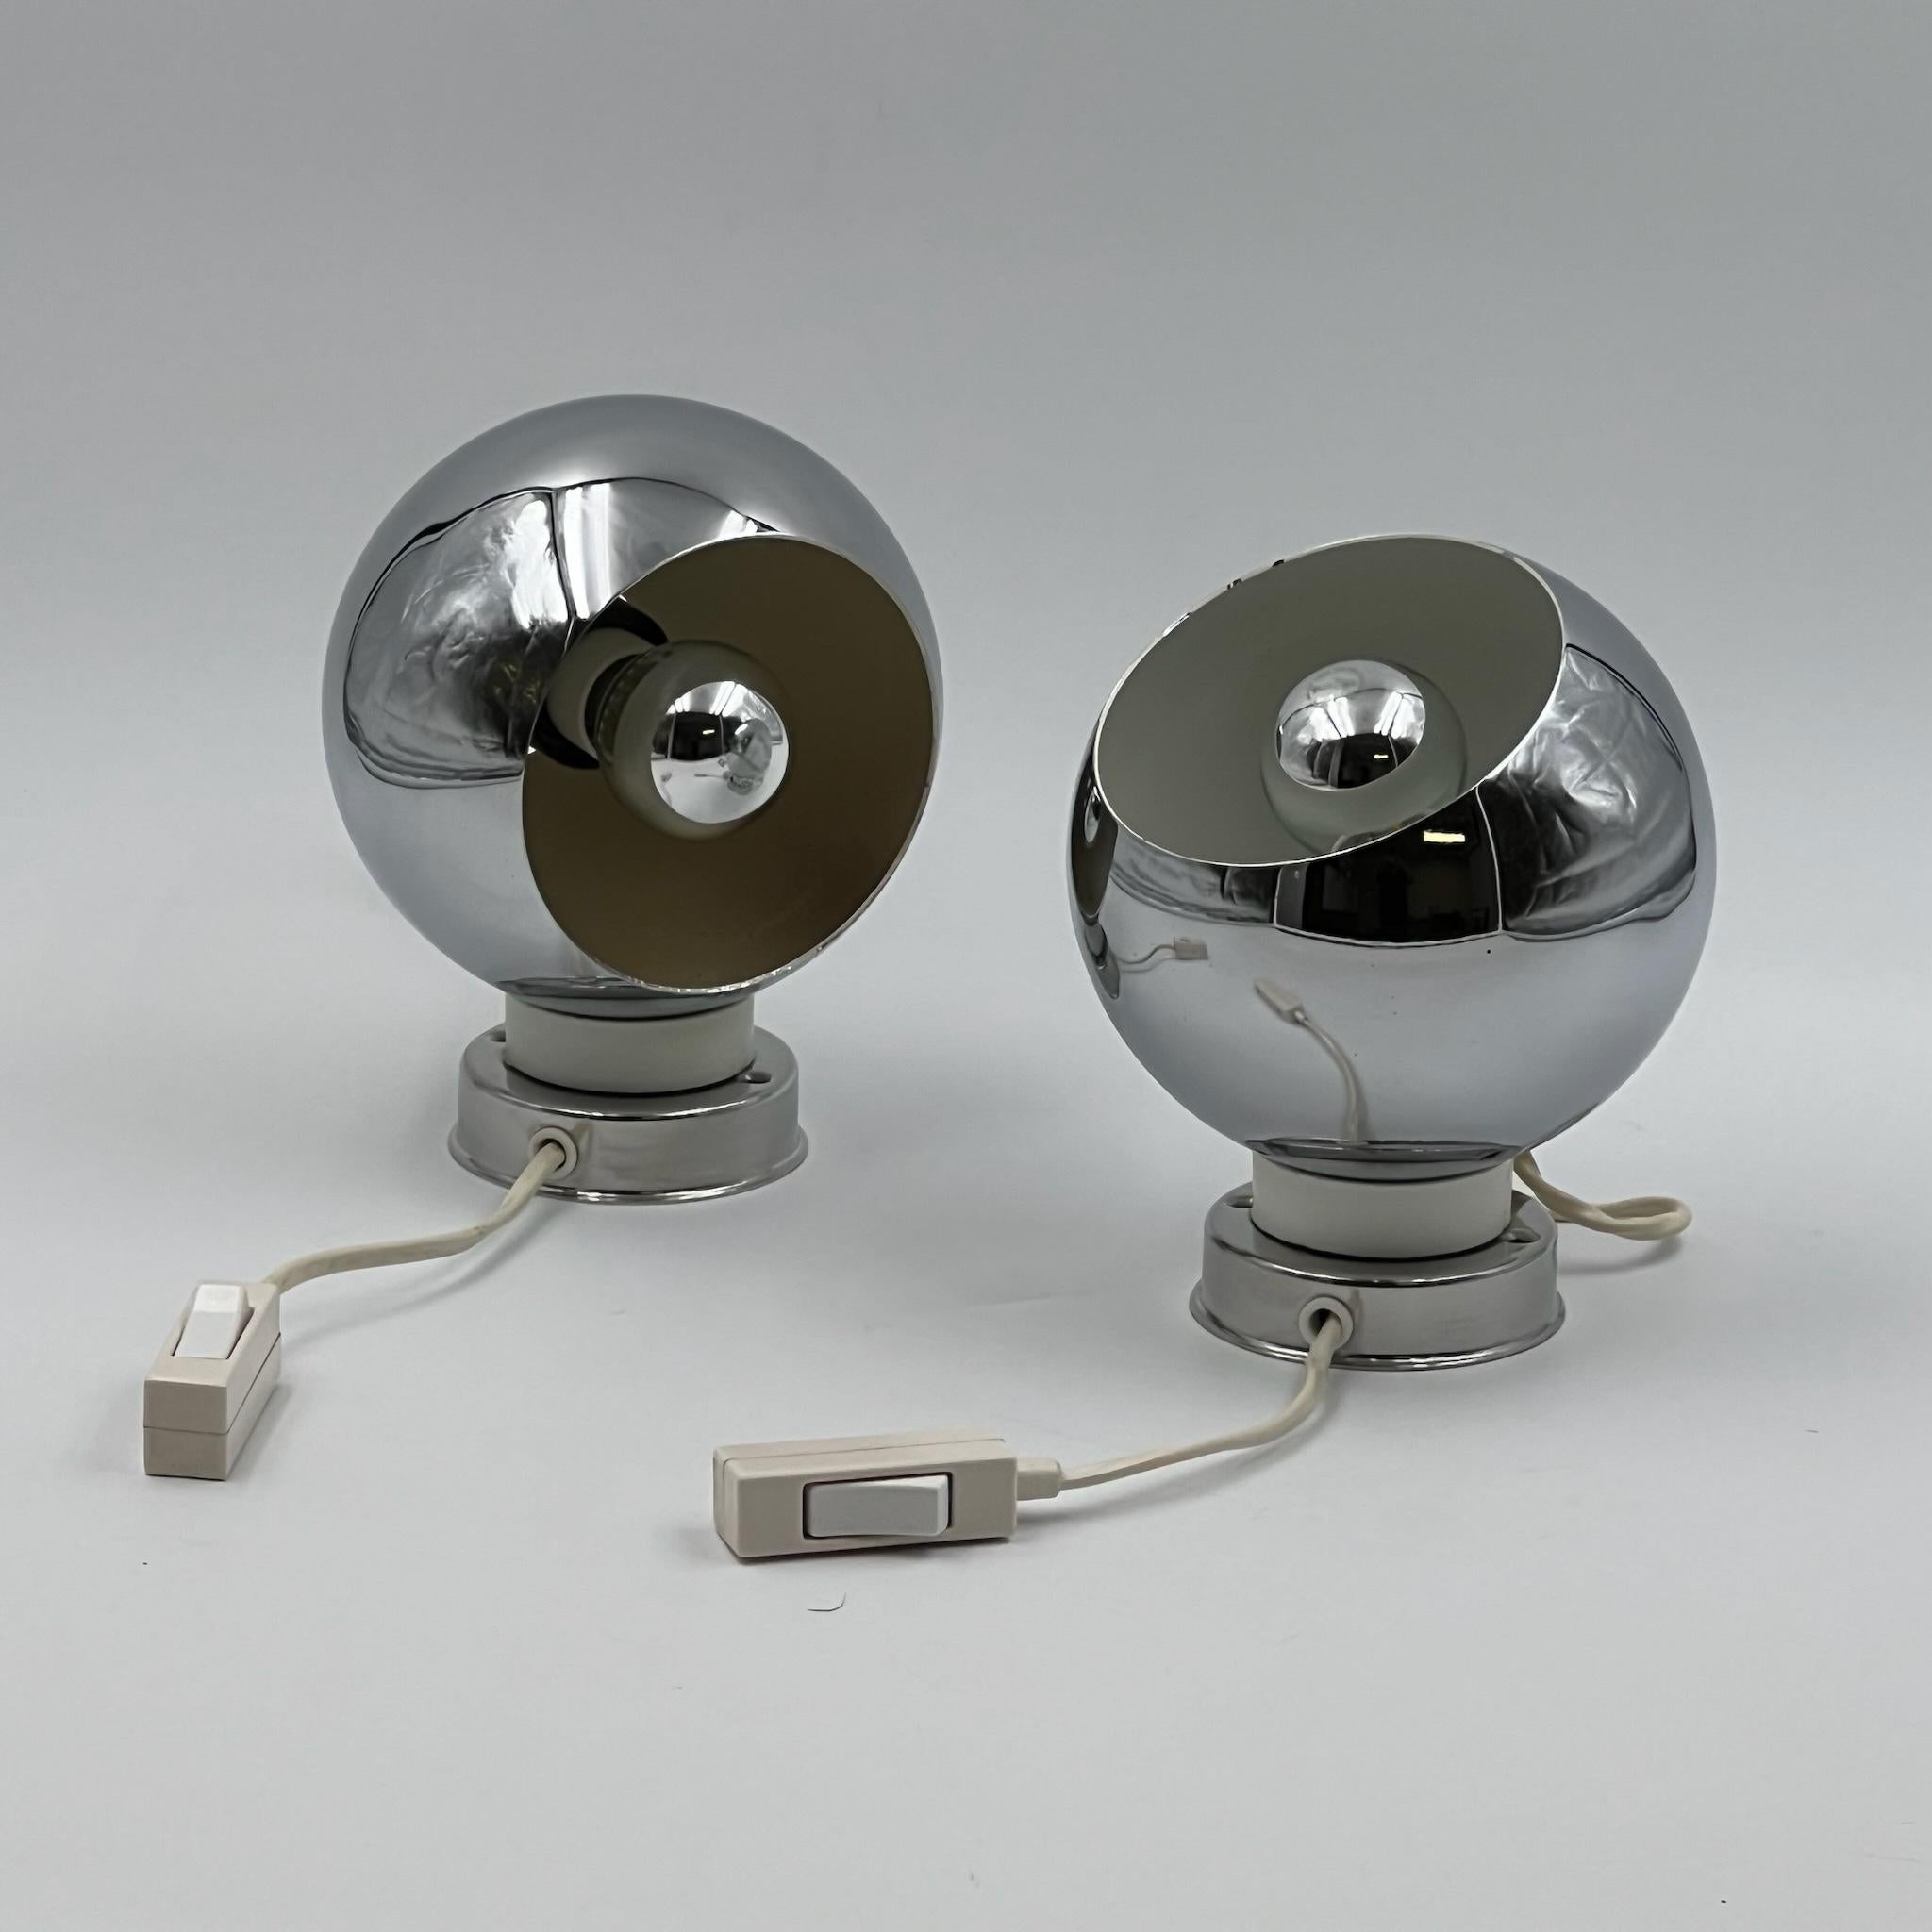 Italian Iconic Reggiani 'Eyeball' Lamps 60s - Pair of Vintage Masterpieces - Set of 2 For Sale